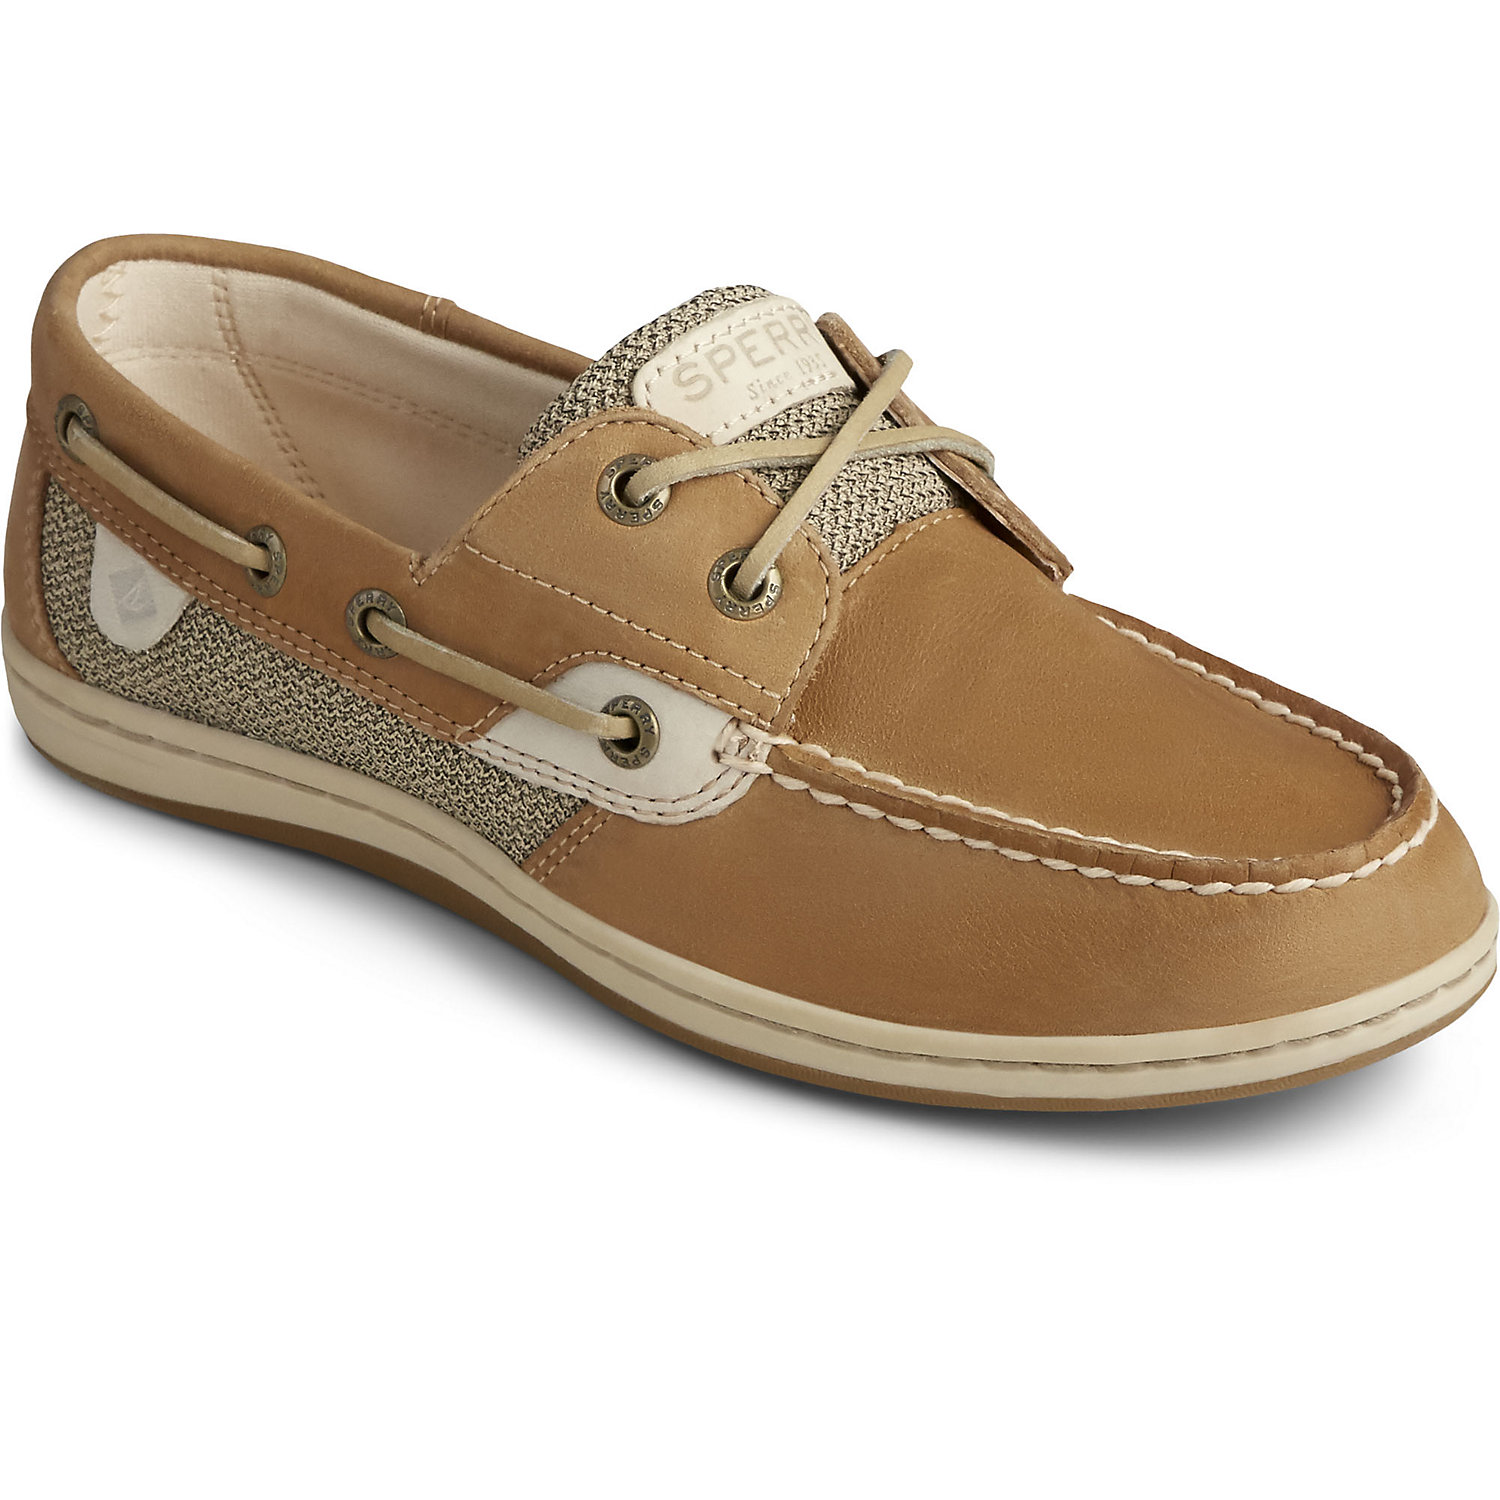 Sperry Womens Koifish Boat Shoe